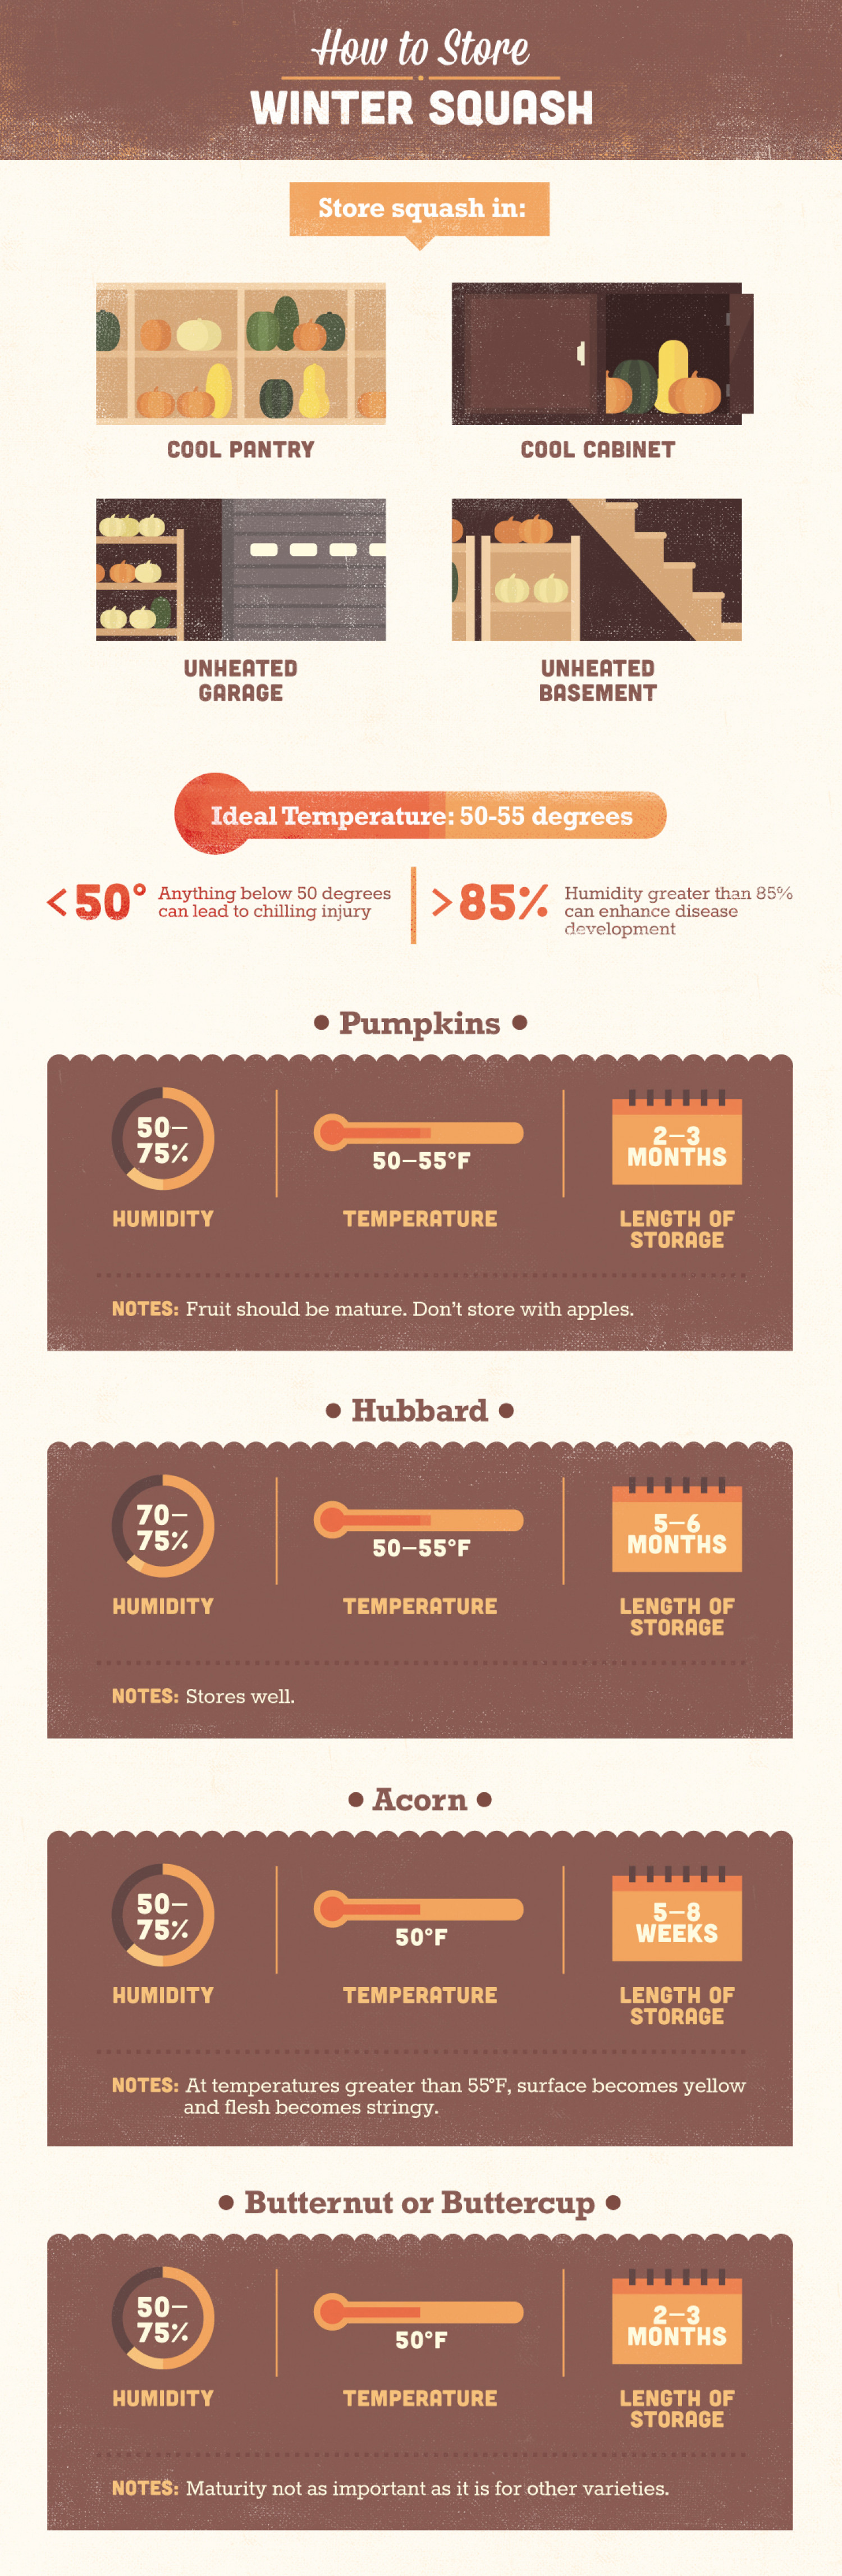 How to Store Winter Squash Infographic